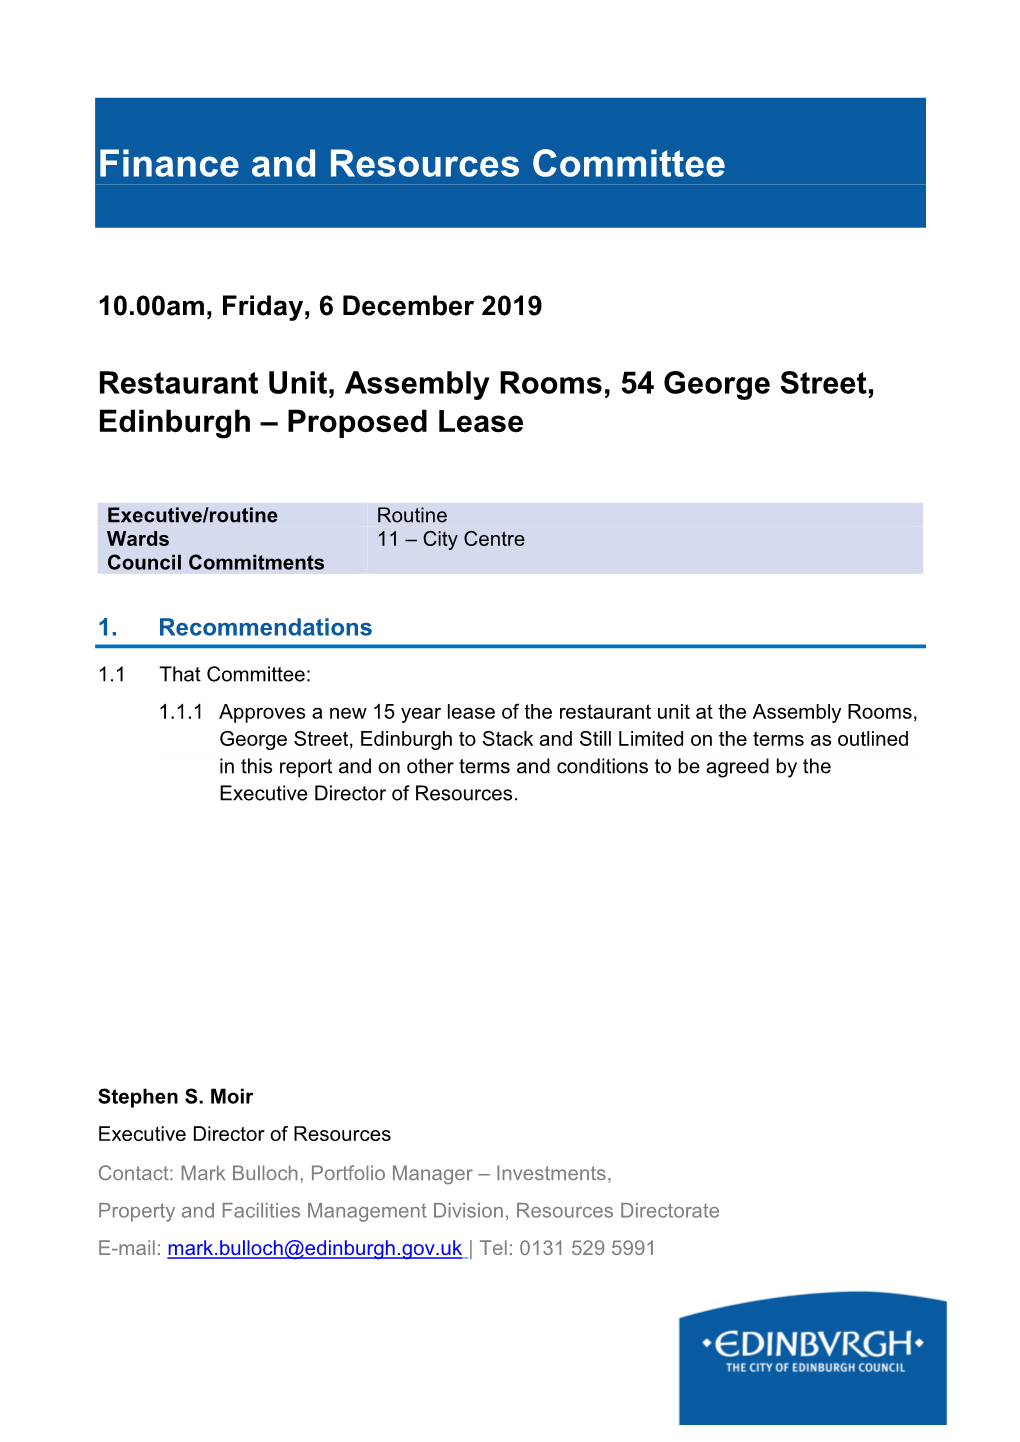 Finance and Resources Committee 10.00Am, Friday, 6 December 2019 Restaurant Unit, Assembly Rooms, 54 George Street, Edinburgh